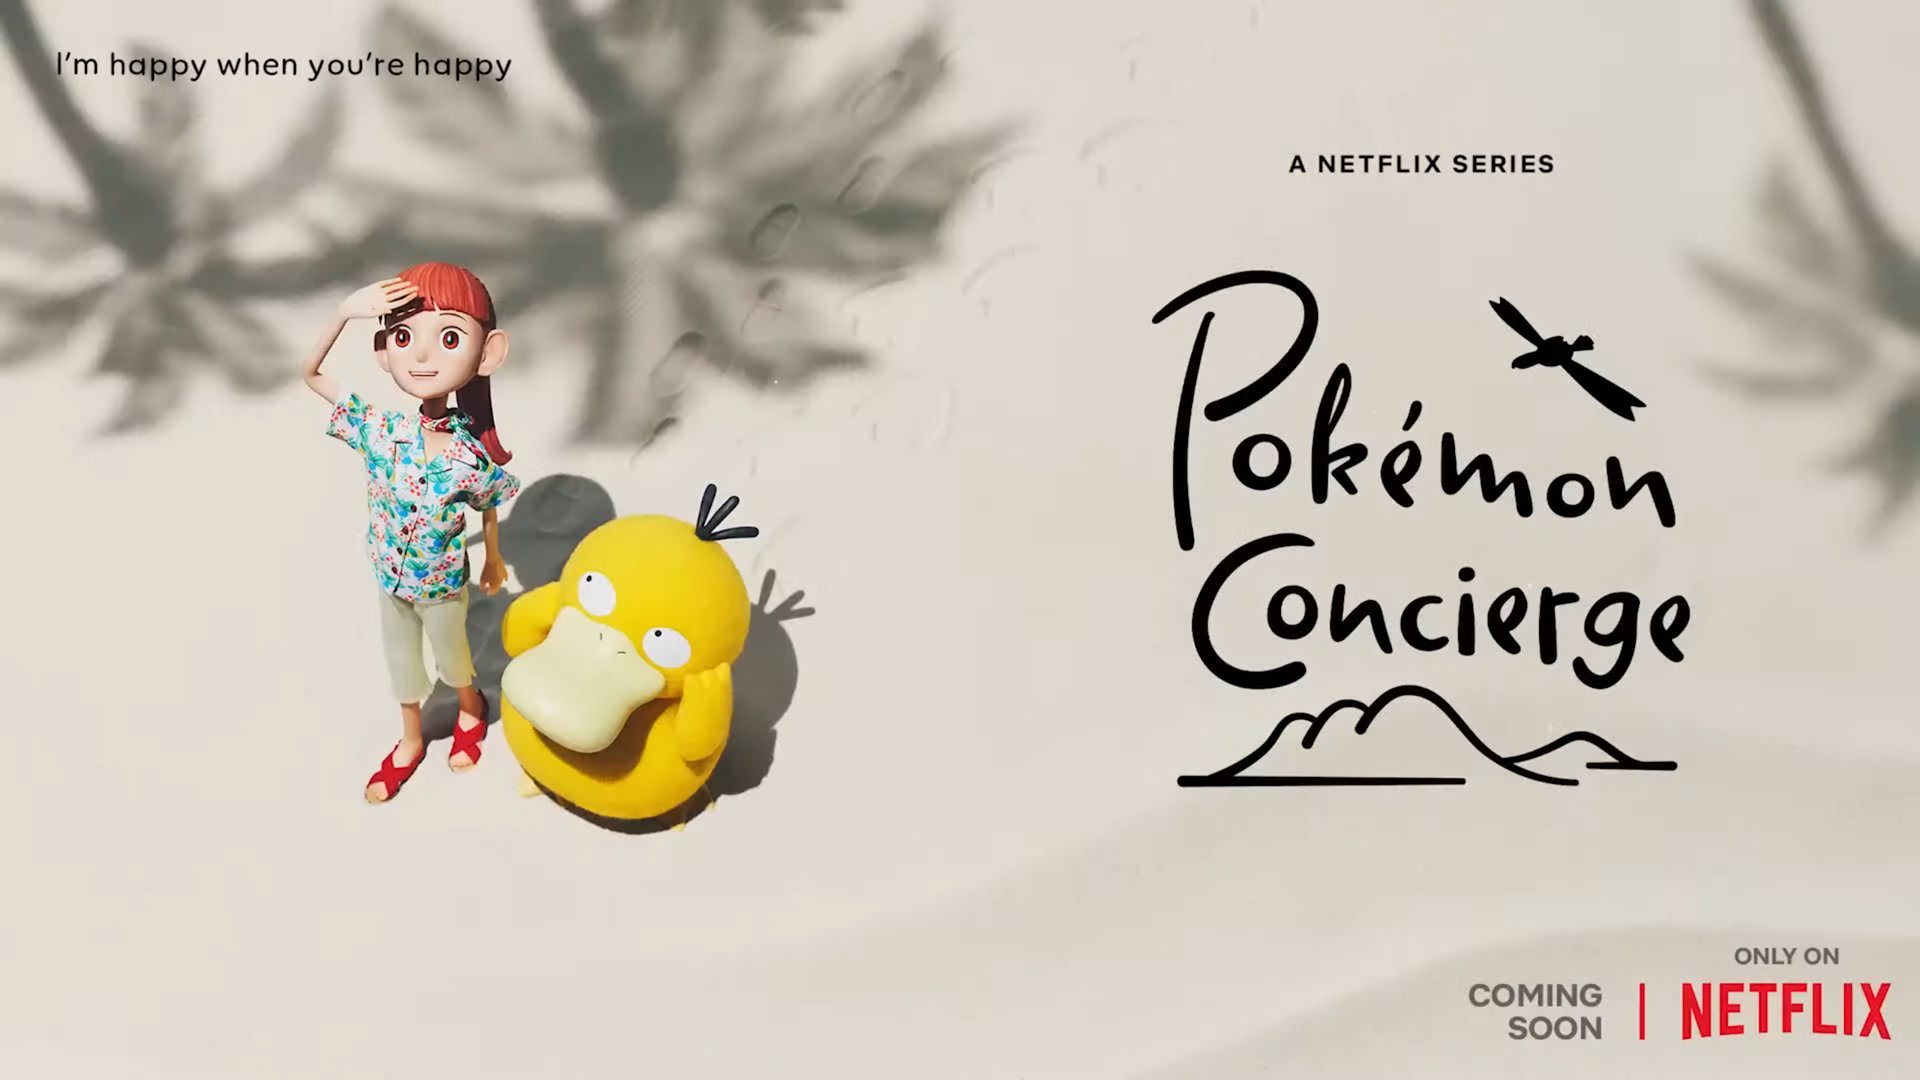 Pokemon Concierge is a New Netflix Stop-Motion Animated Series -  GameRevolution